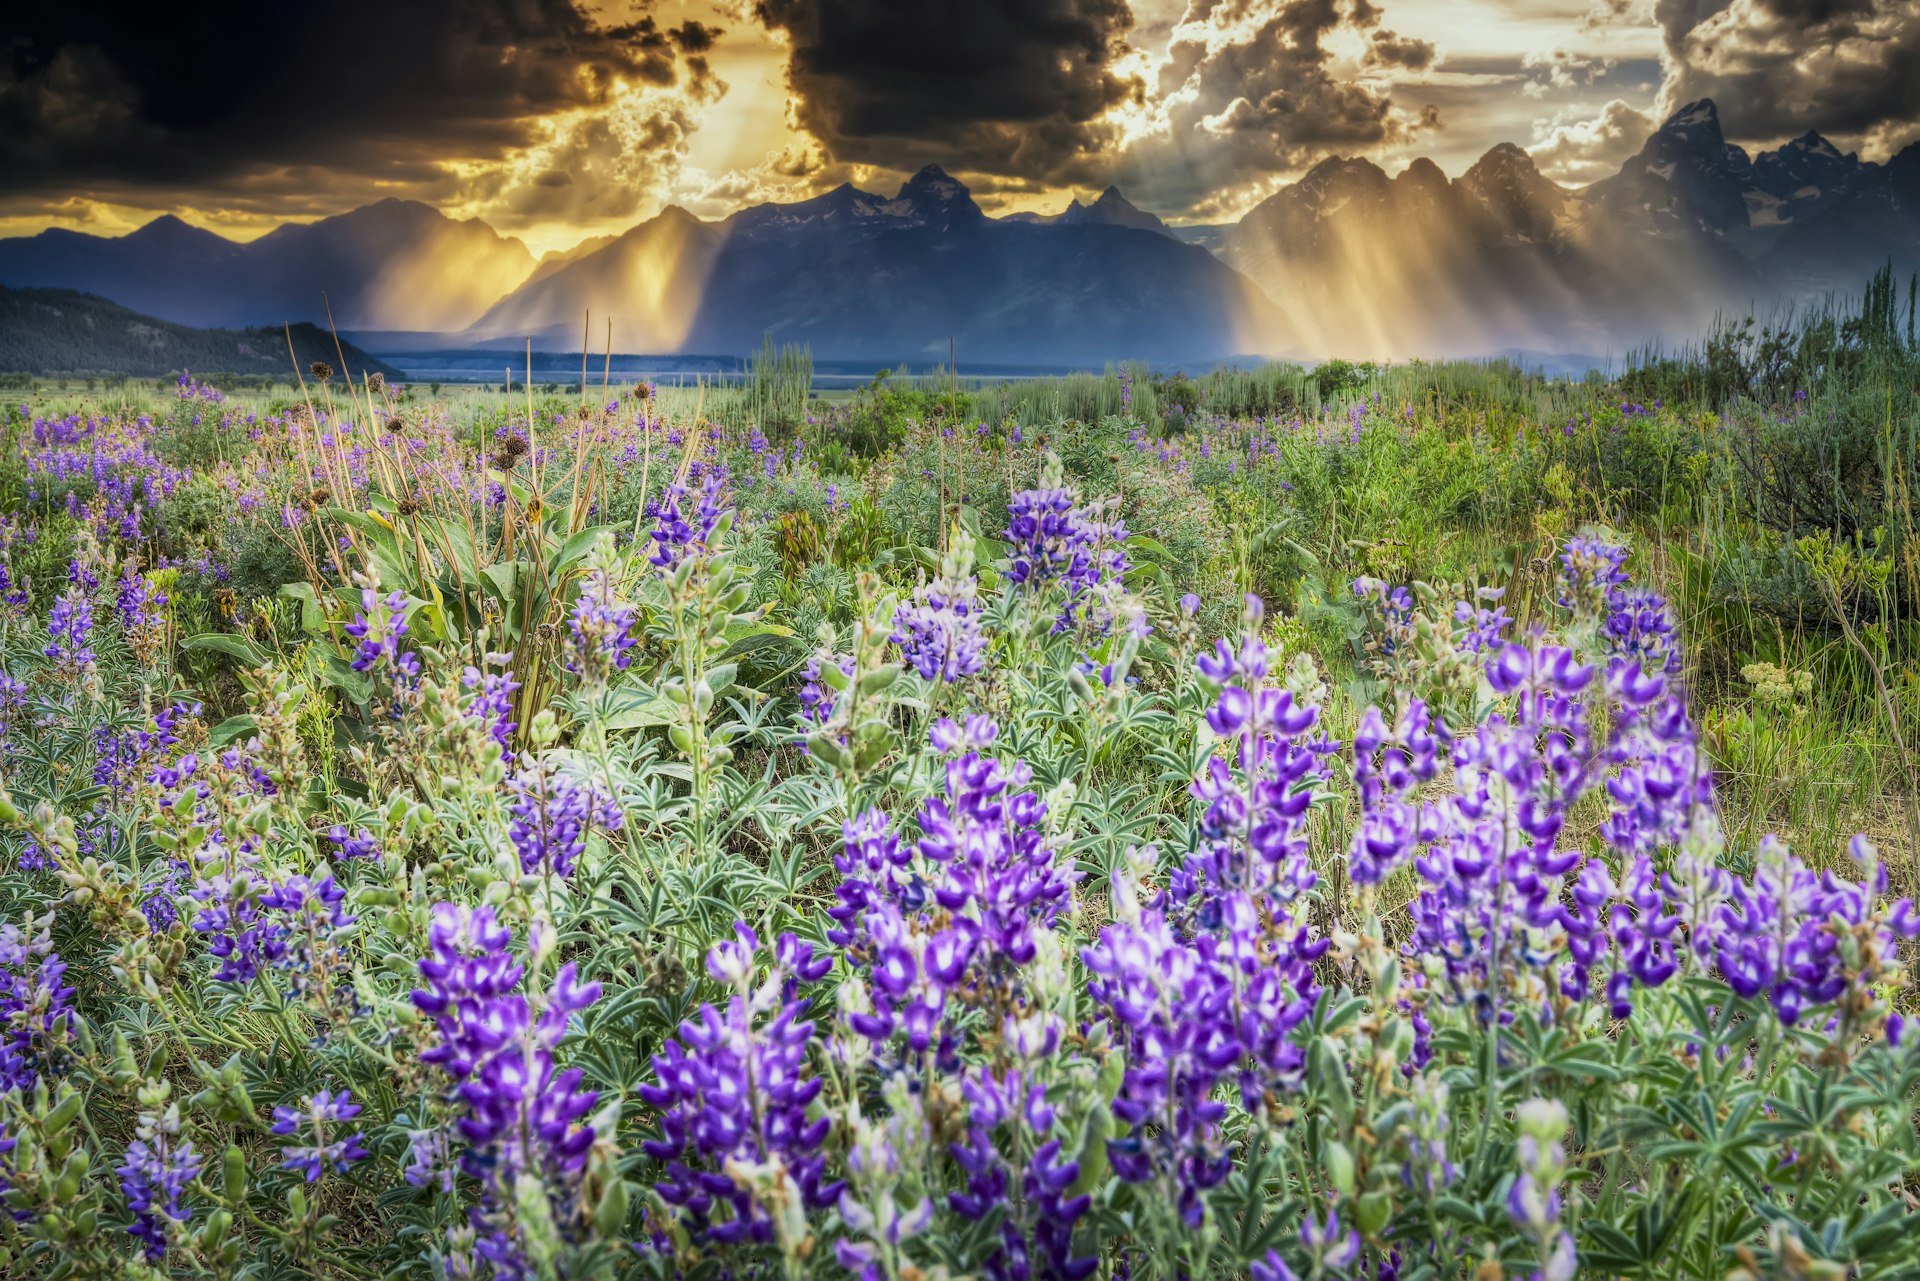 Summer lupine wildflowers under a stormy late afternoon sky in the Tetons